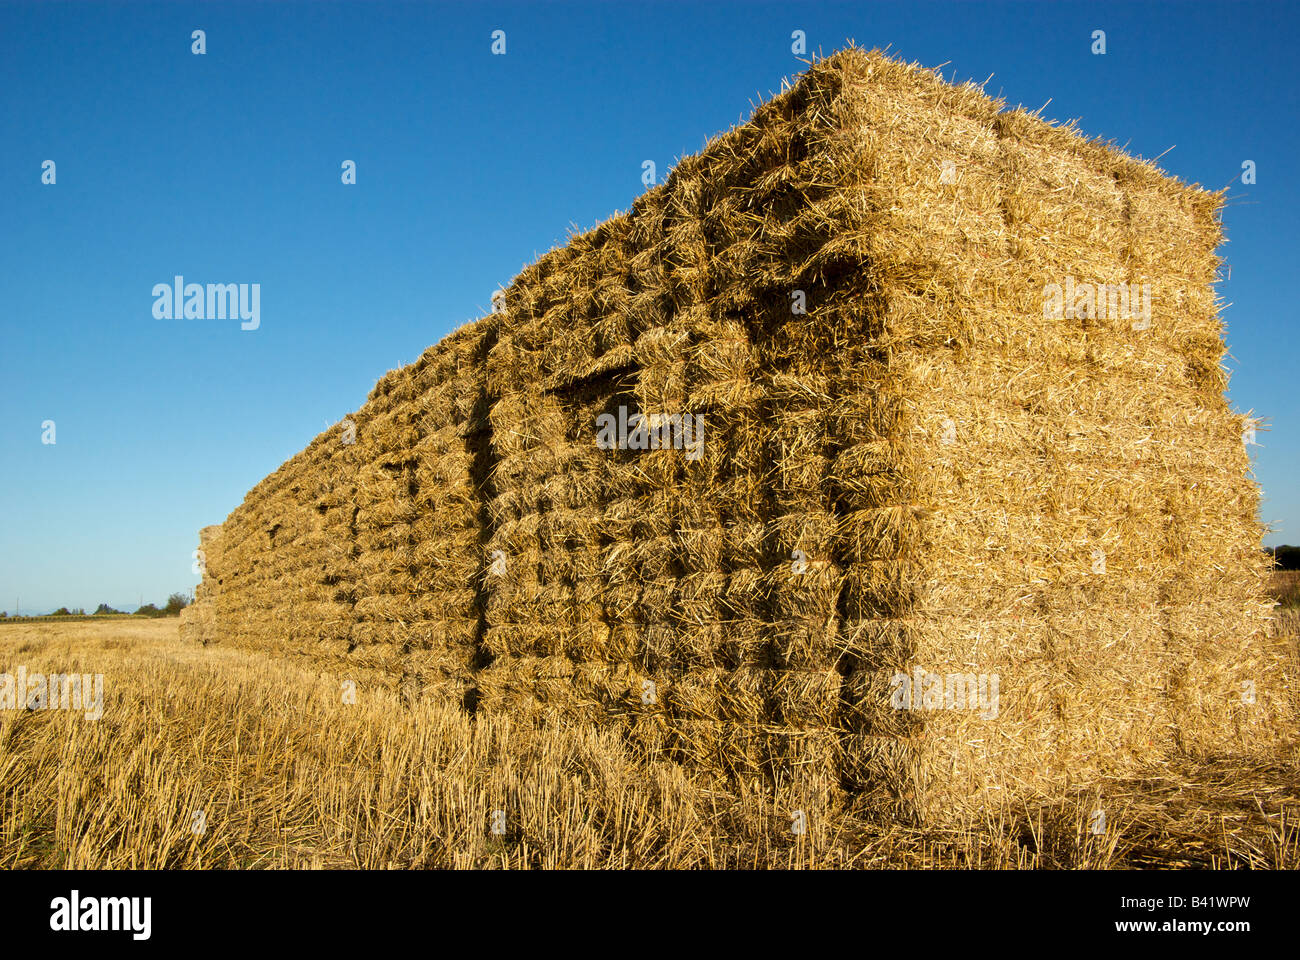 Wall of hay straw bales stacked in a barley field Stock Photo